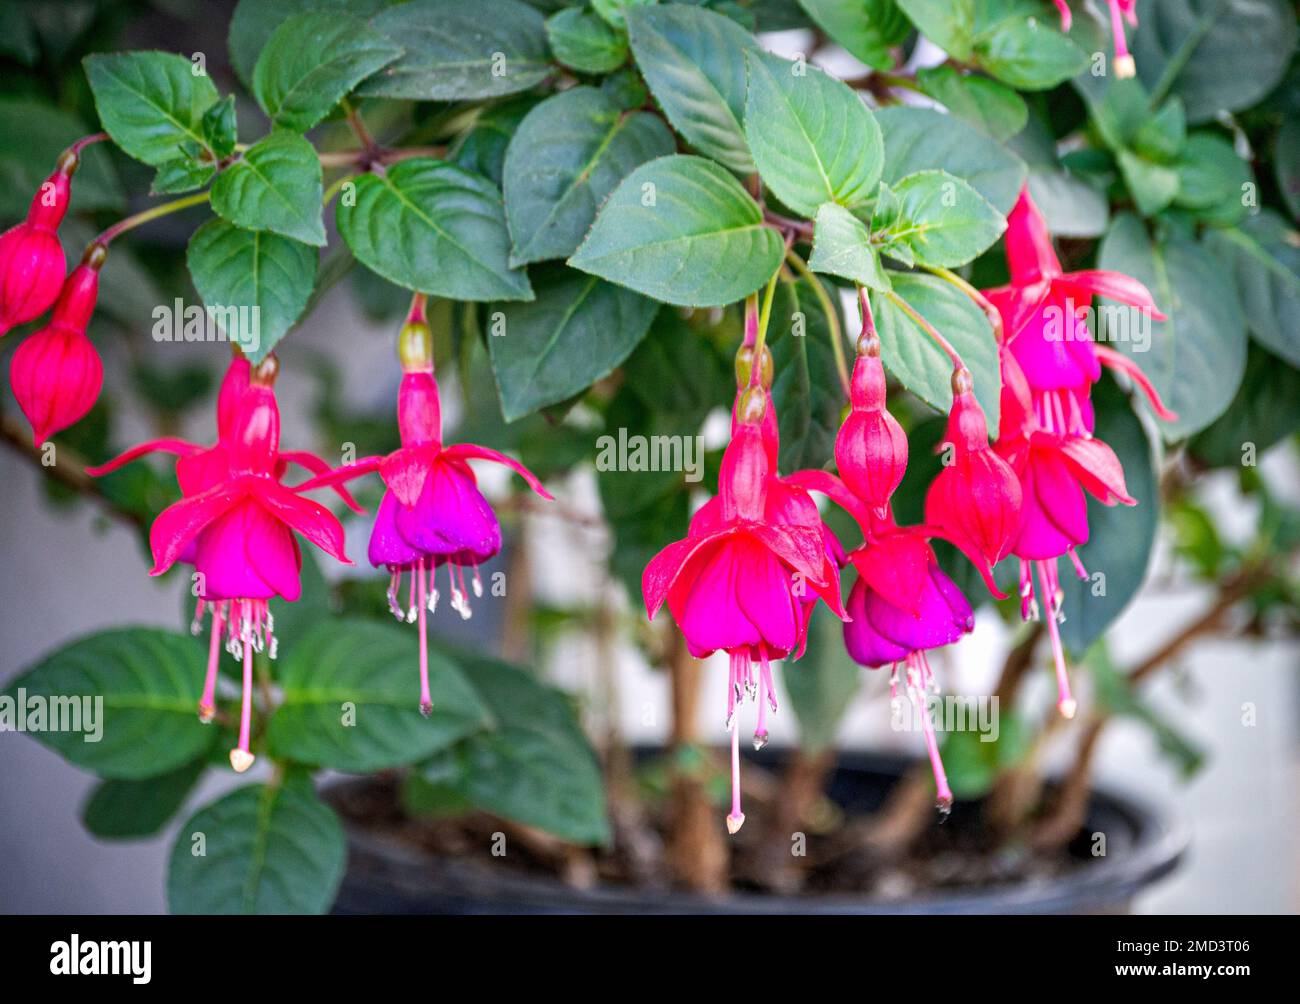 Fuchsia flowers hanging from the branches of crimson lilac flowers in the city park. Stock Photo